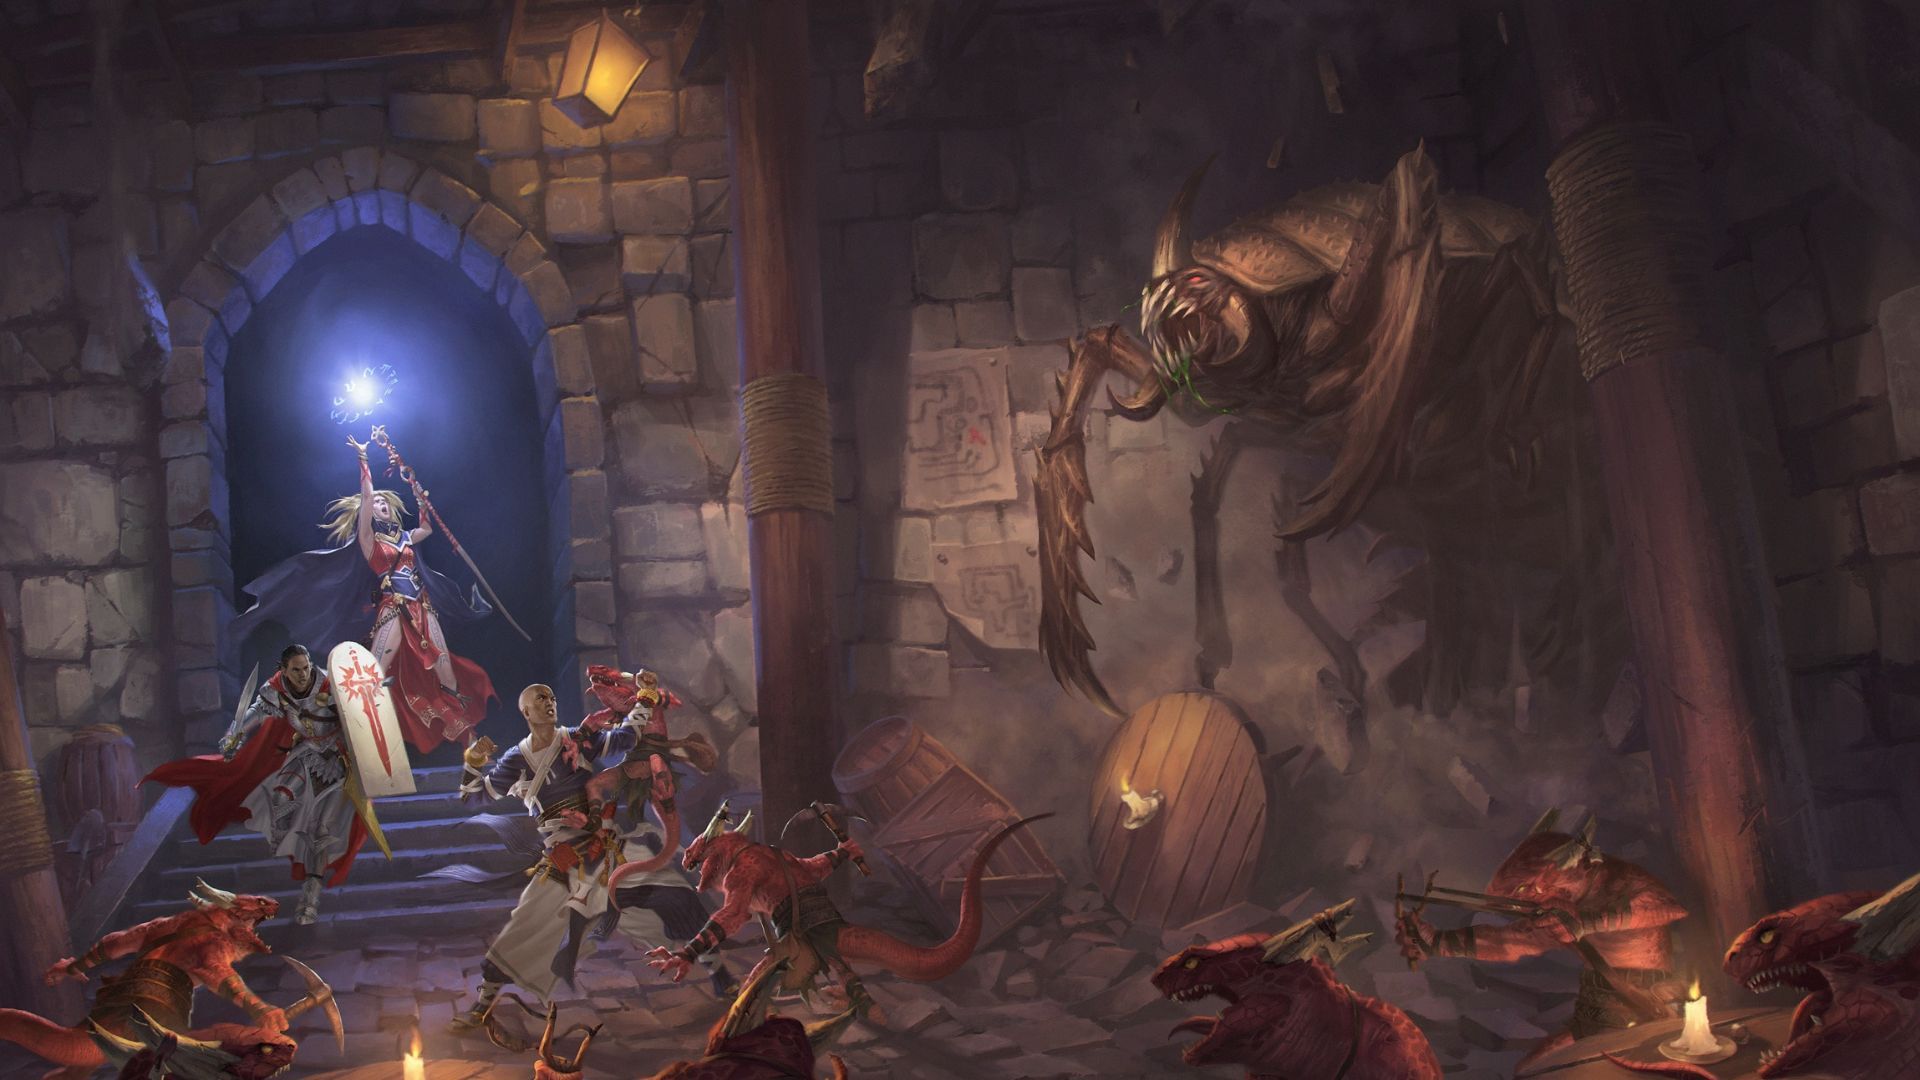 A witch, paladin and monk face off against a swarm of kobolds in an underground dungeon